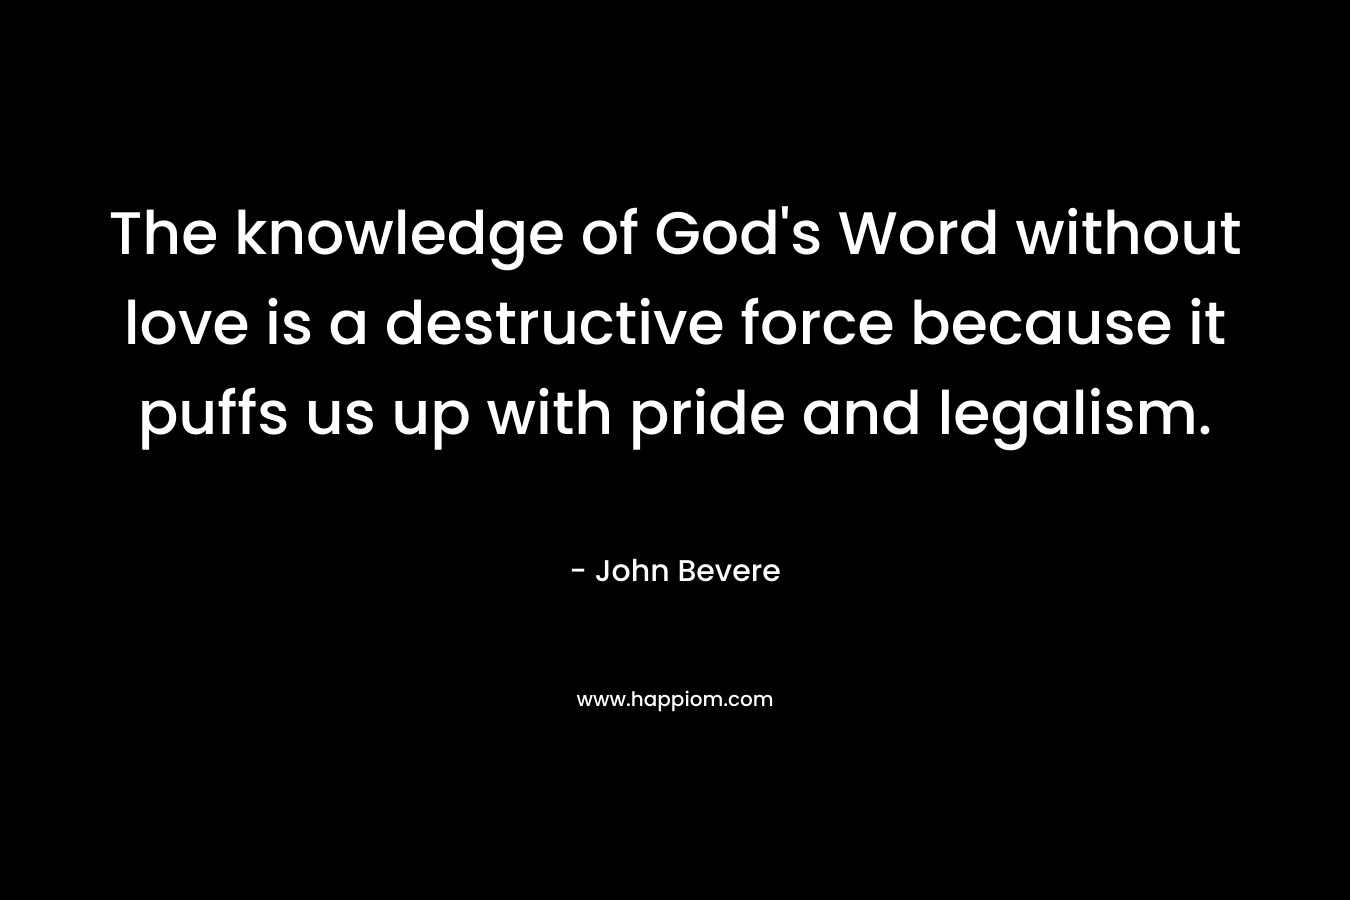 The knowledge of God’s Word without love is a destructive force because it puffs us up with pride and legalism. – John Bevere